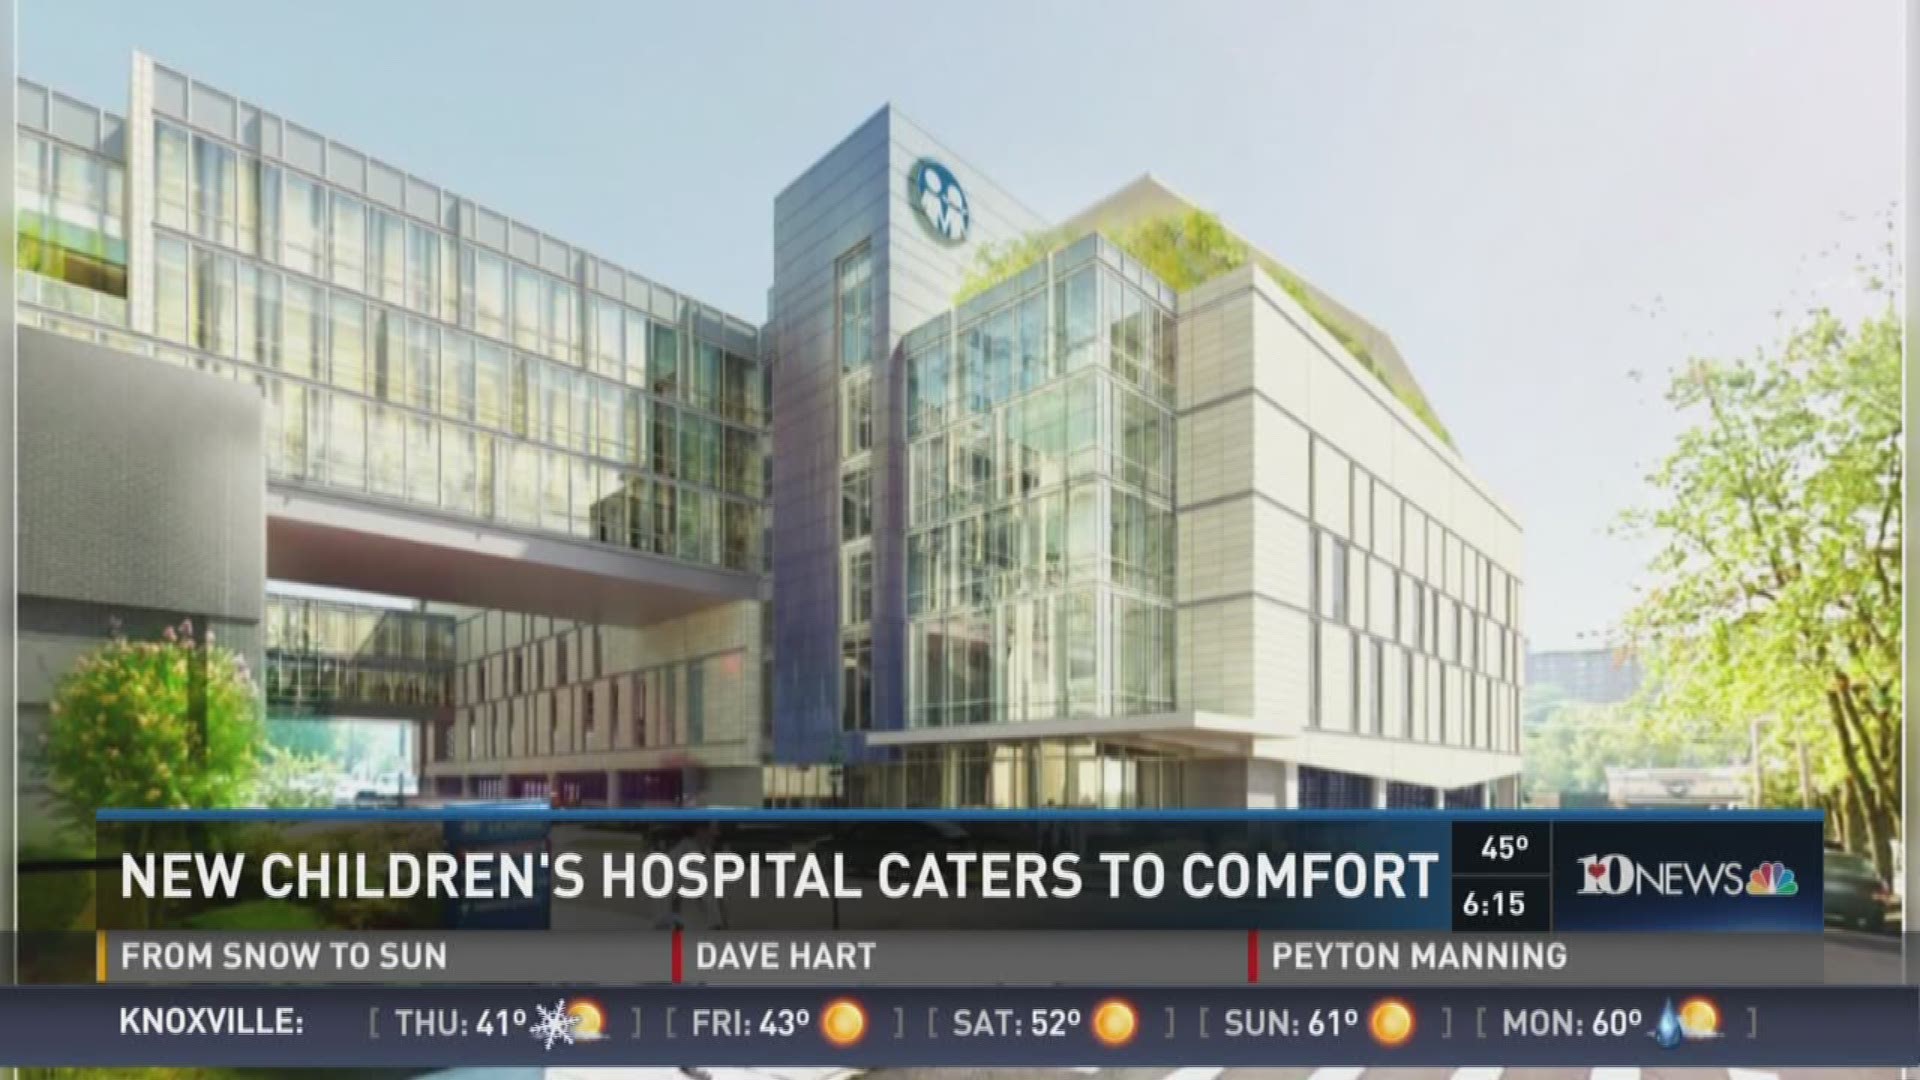 10News reporter Rachel Wittel takes us inside a new addition to the East Tennessee Children's Hospital